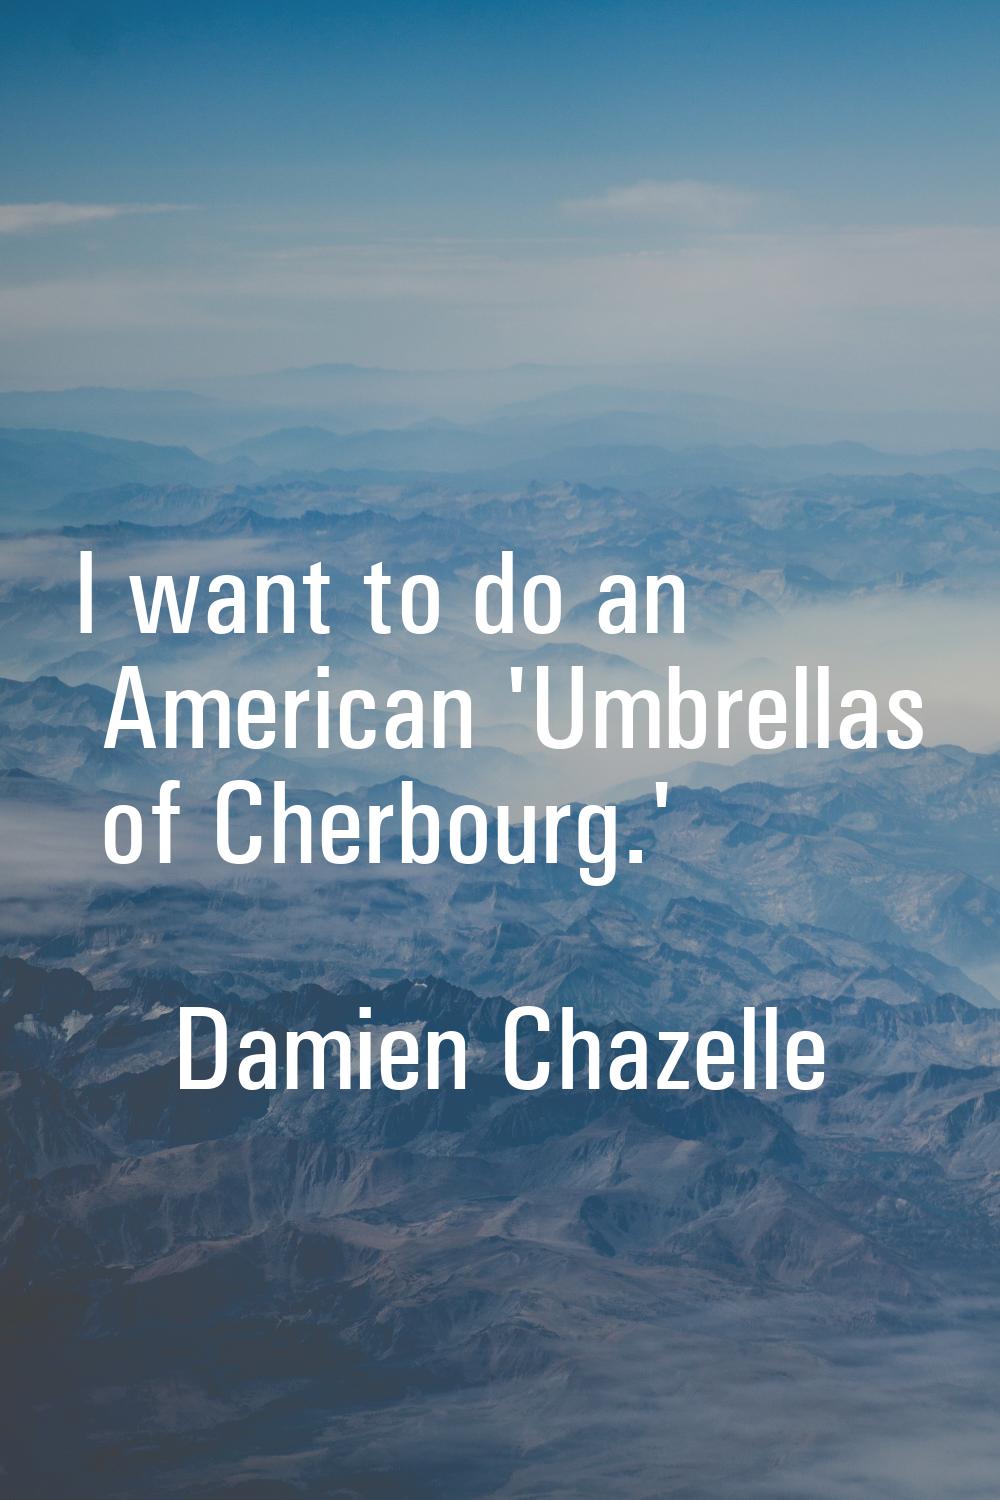 I want to do an American 'Umbrellas of Cherbourg.'